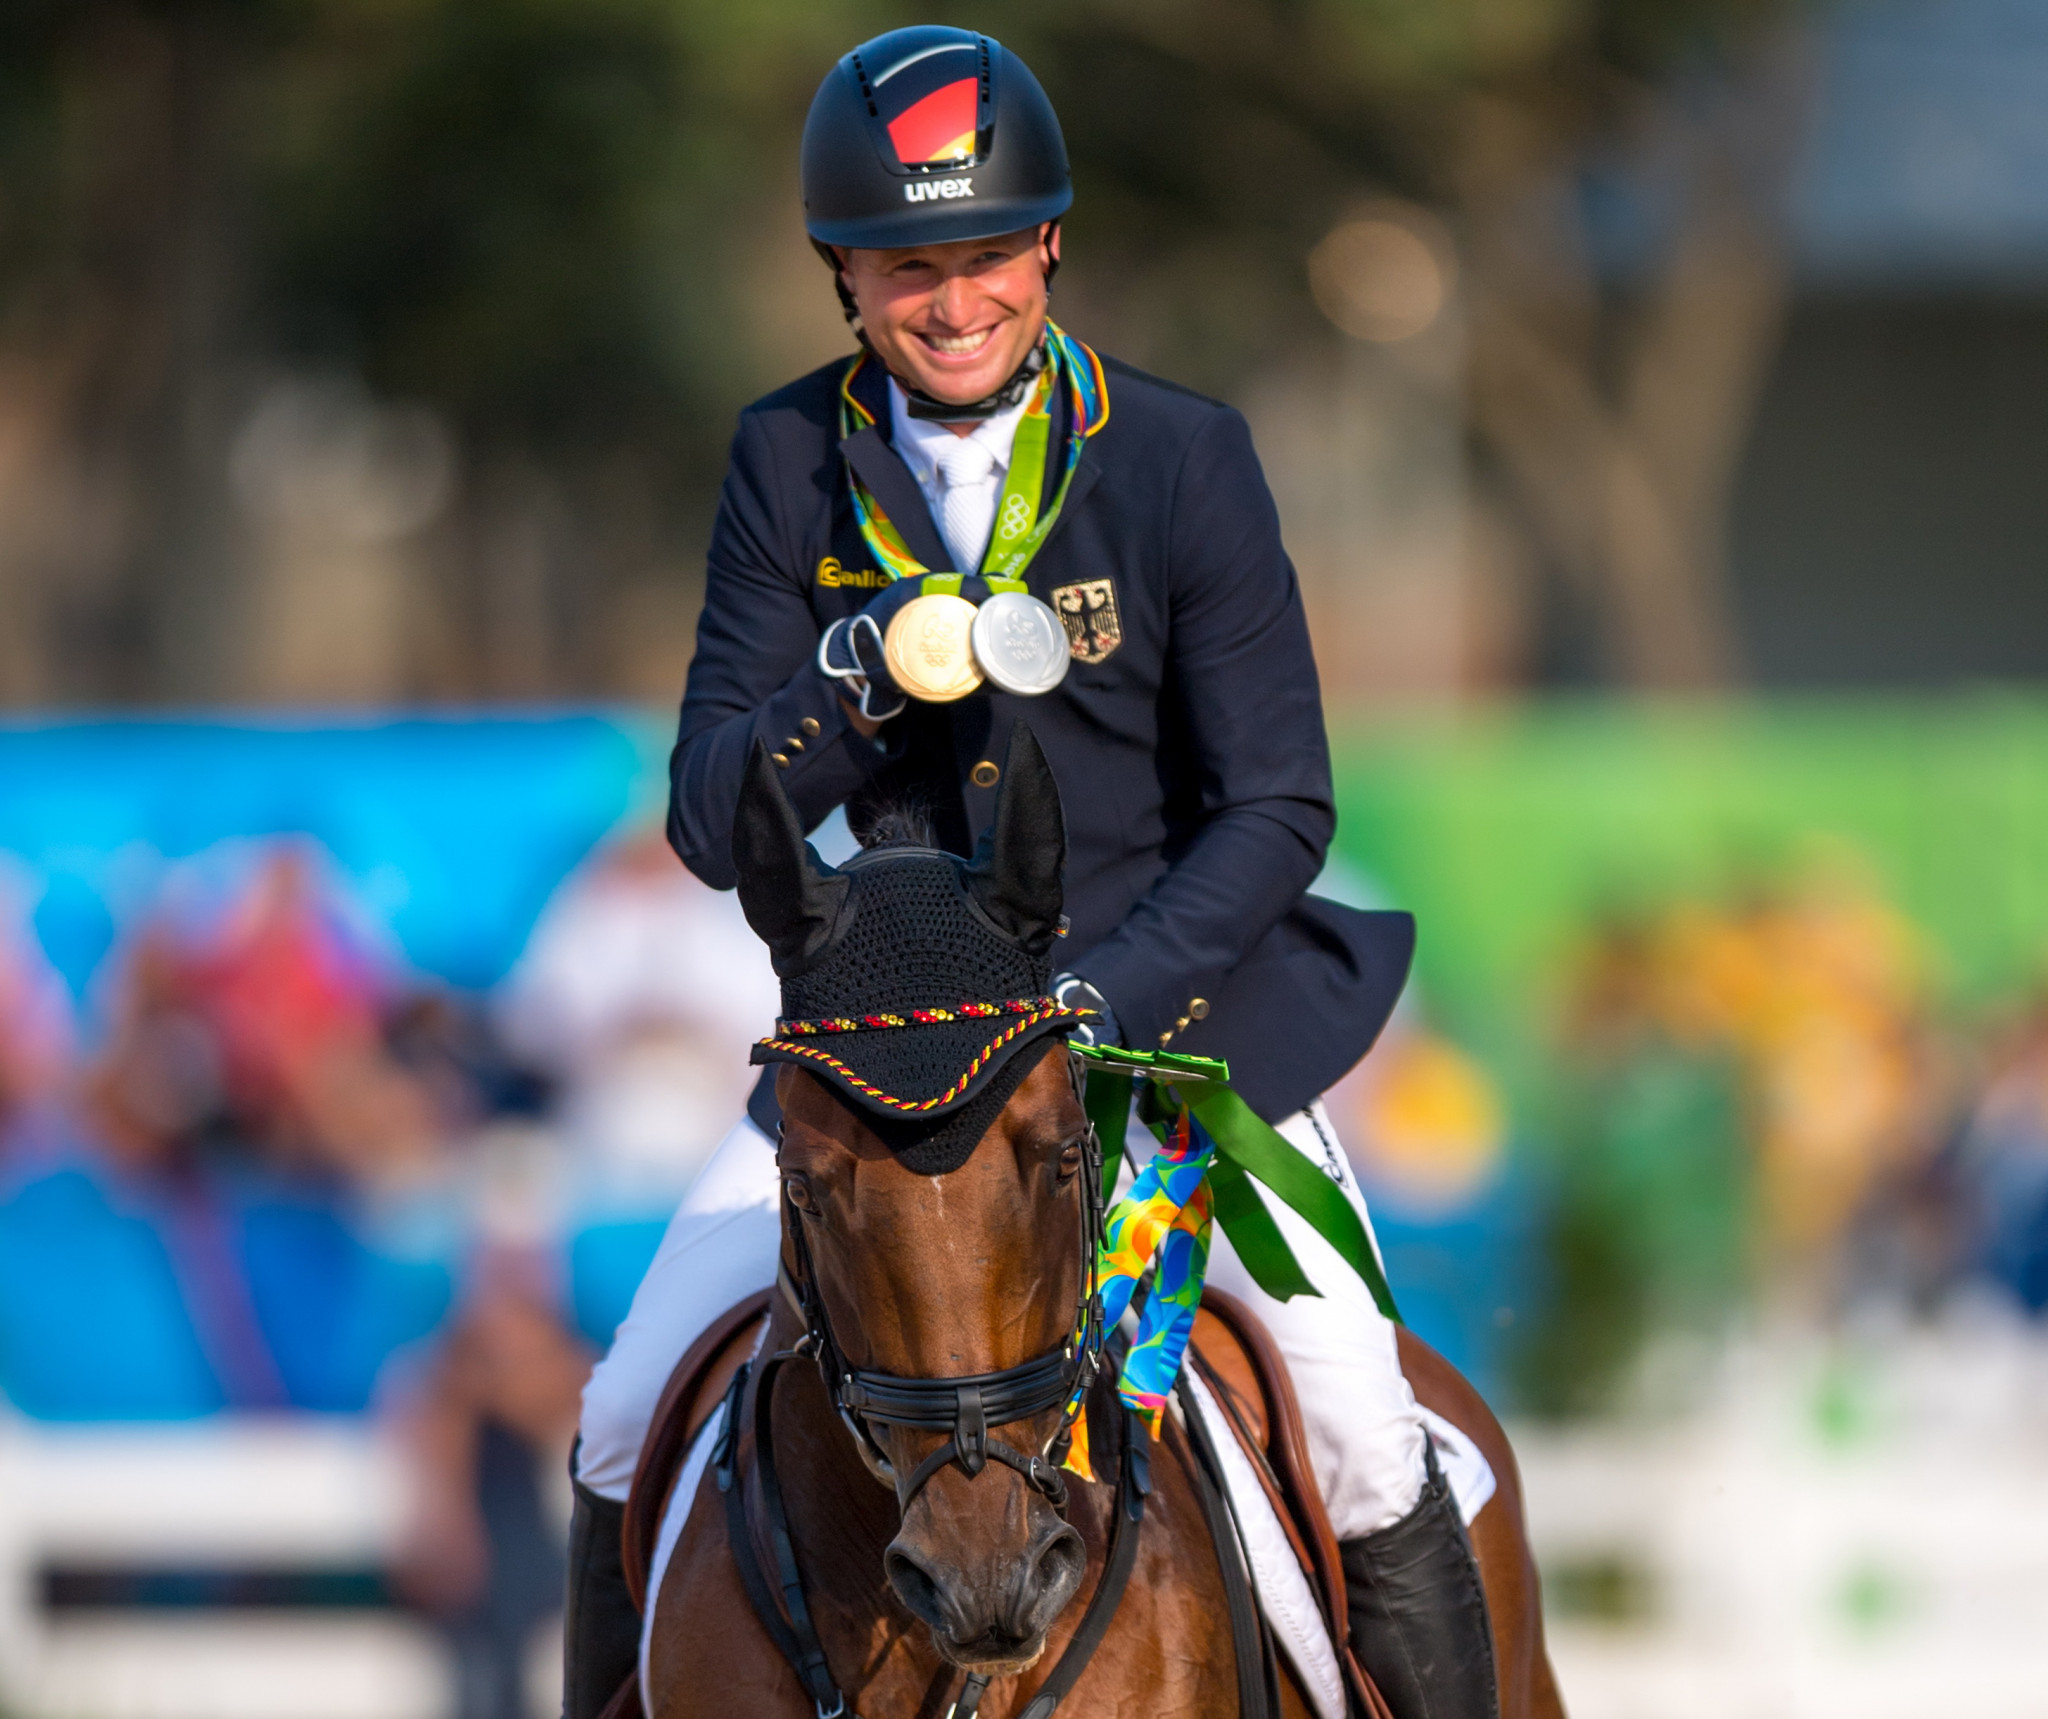 Jung leads star field for equestrian Tokyo 2020 test event